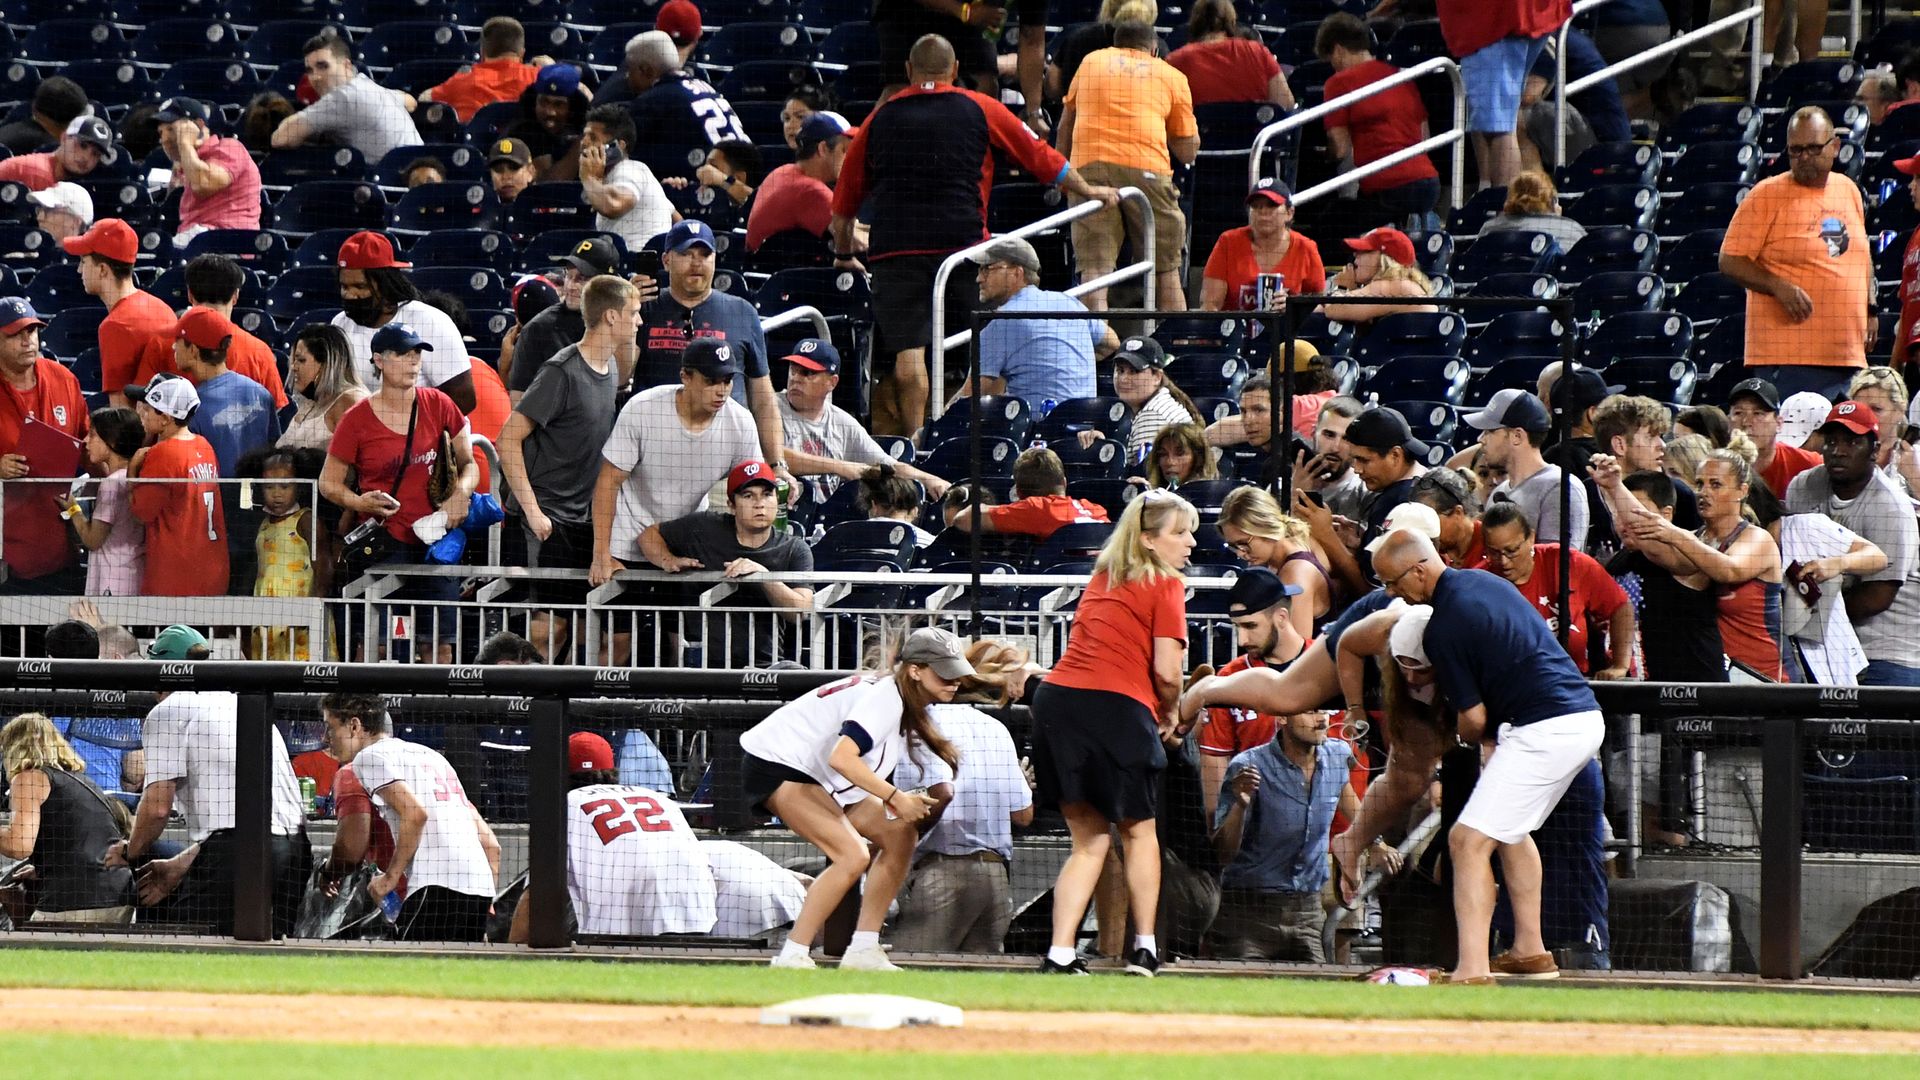  Fans run for cover after what was believed to be shots were heard during a baseball game between the San Diego Padres the Washington Nationals at Nationals Park on July 17, 2021 in Washington, DC. 